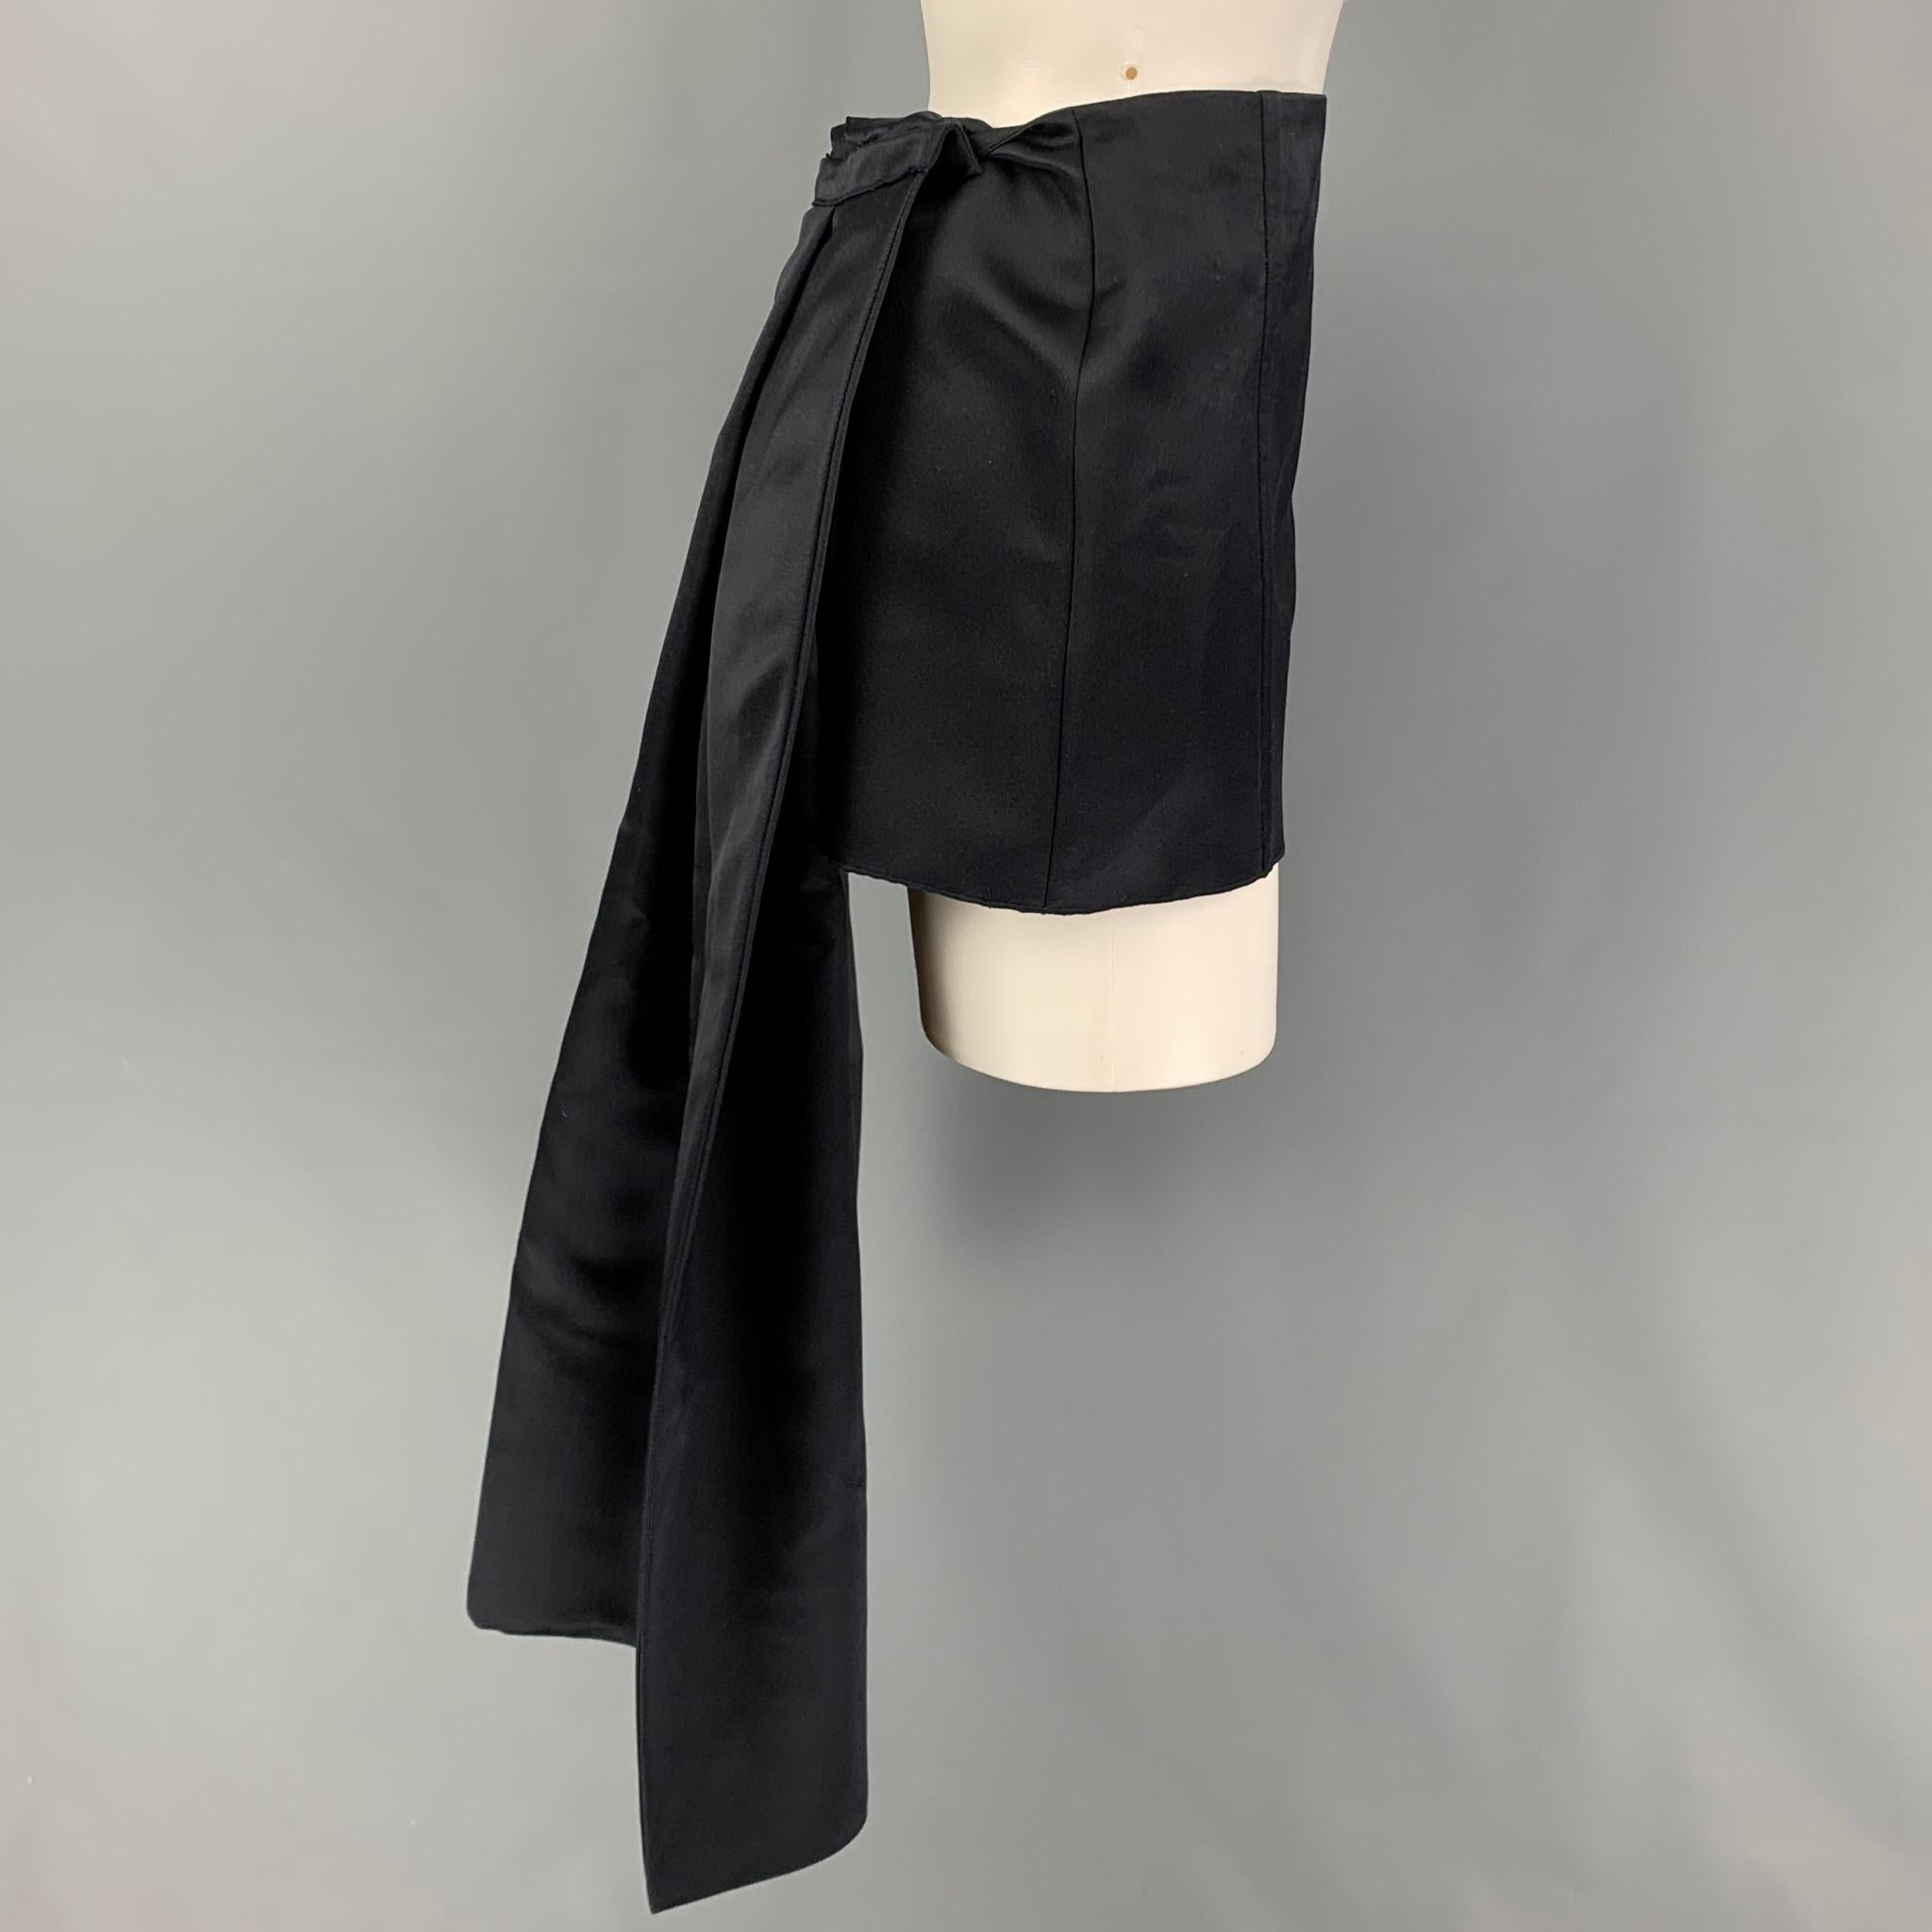 PRADA Spring-Summer 2022 mini skirt comes in a navy satin silk featuring a detachable train design and side zipper closure. Made in italy. 

Very Good Pre-Owned Condition.
Marked: 38

Measurements:

Waist: 29 in.
Hip: 36 in.
Skirt Length: 11.5